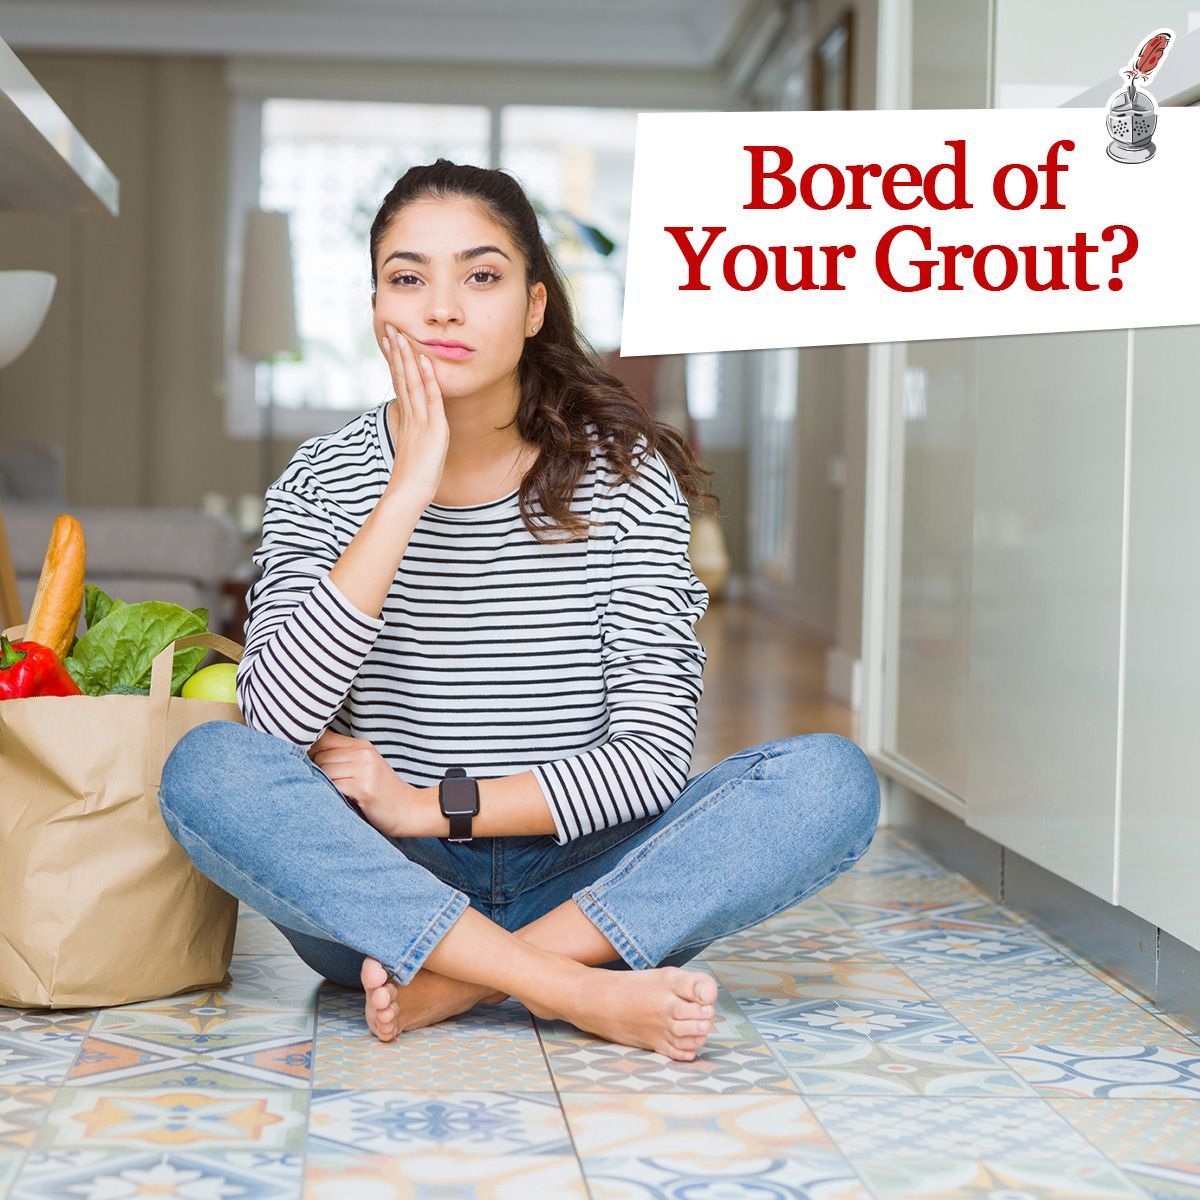 Bored of Your Grout?